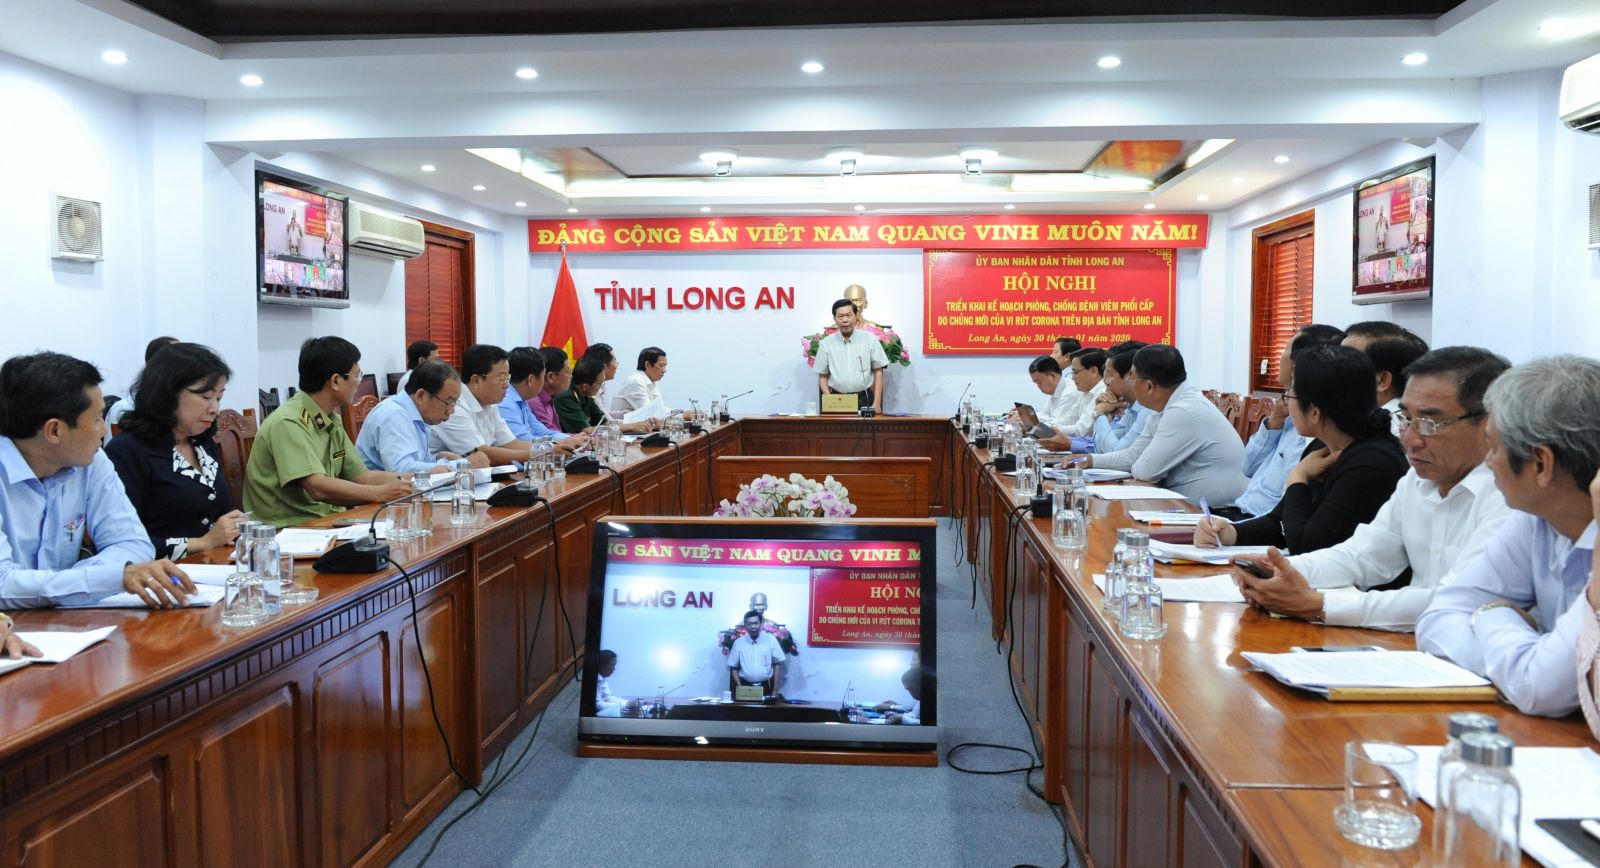 Deputy Secretary of the Provincial Party Committee, Chairman of Long An Provincial People's Committee - Tran Van Can suggests the relevant levels, branches and localities to urgently implement measures to prevent epidemics effectively.